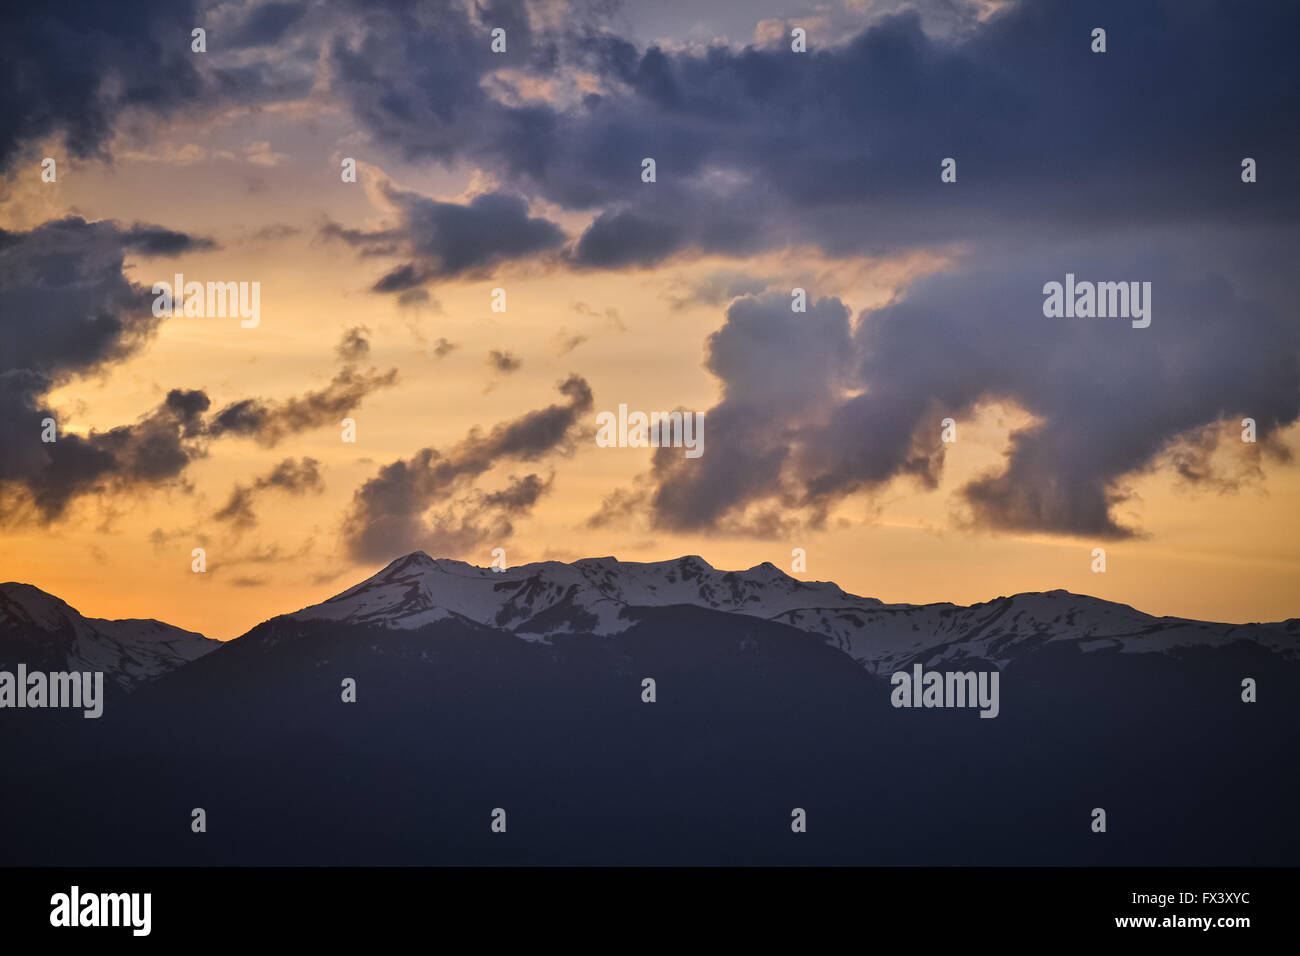 Snowy peak of the mountain and cloudy sky during the sunset Stock Photo